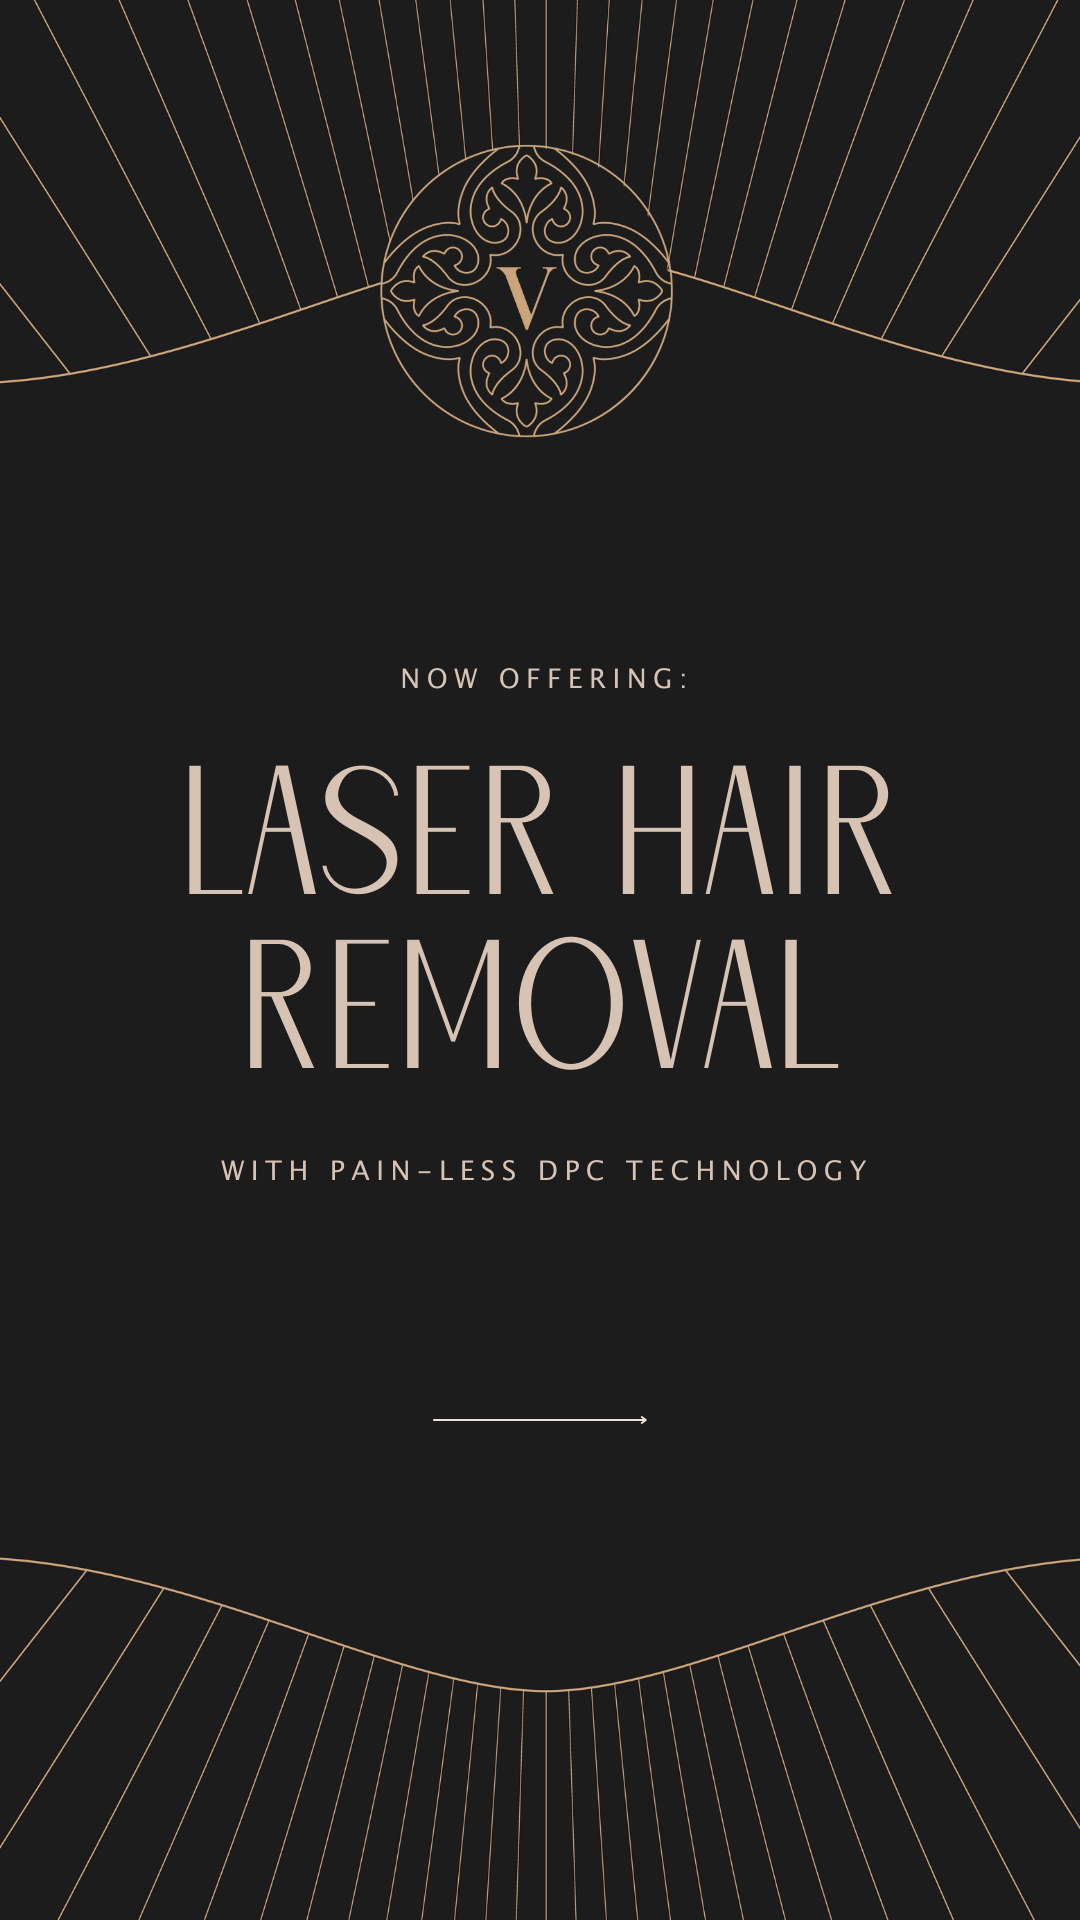 Introducing our newest treatment: Laser Hair Removal ! 